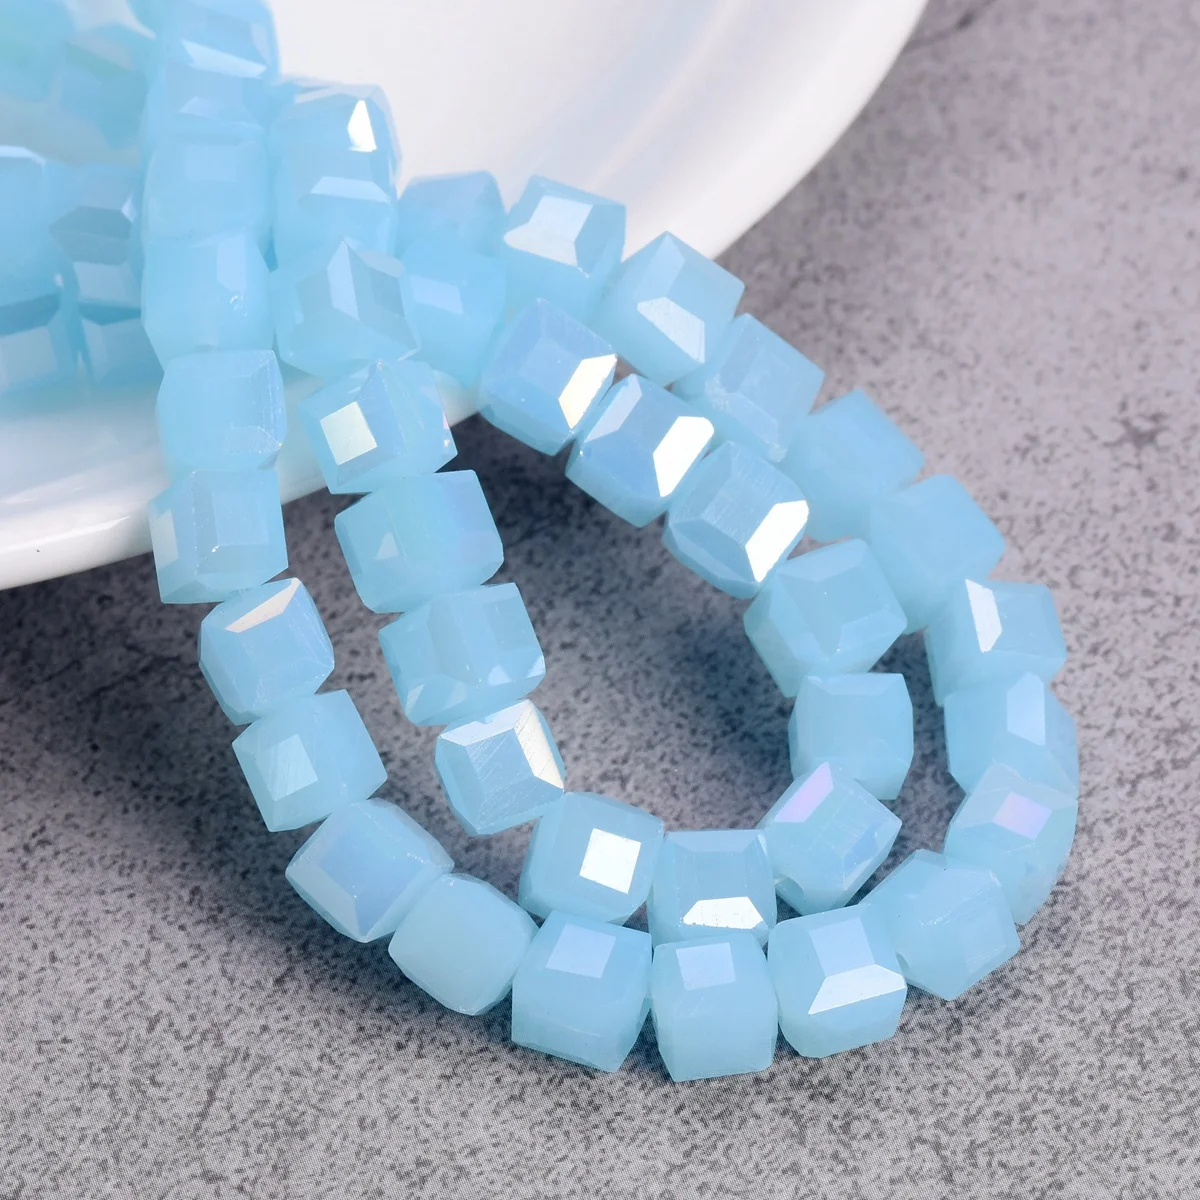 

30pcs 7mm Cube Faceted Opaque Light Blue AB Glass Loose Beads For Jewelry Making DIY Crafts Findings